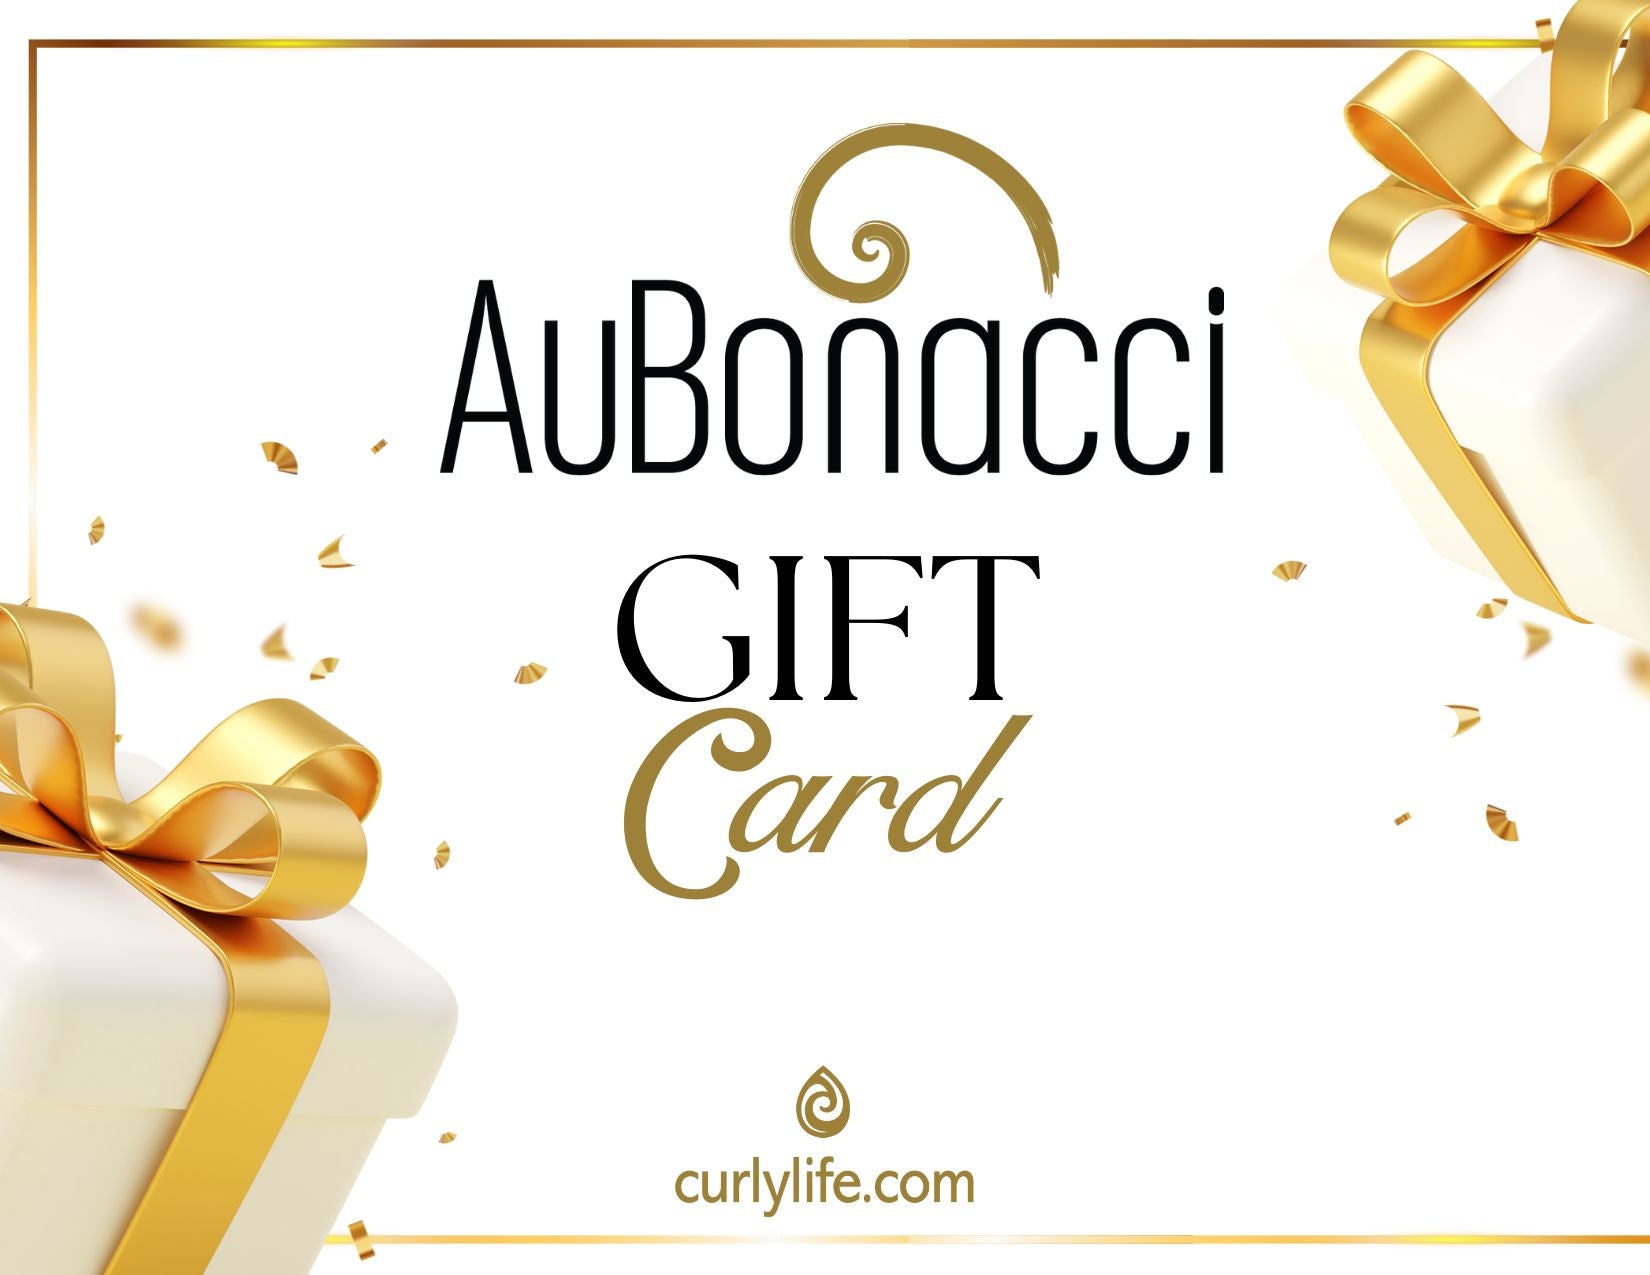 CurlyLife.com Gift Card - curlylife